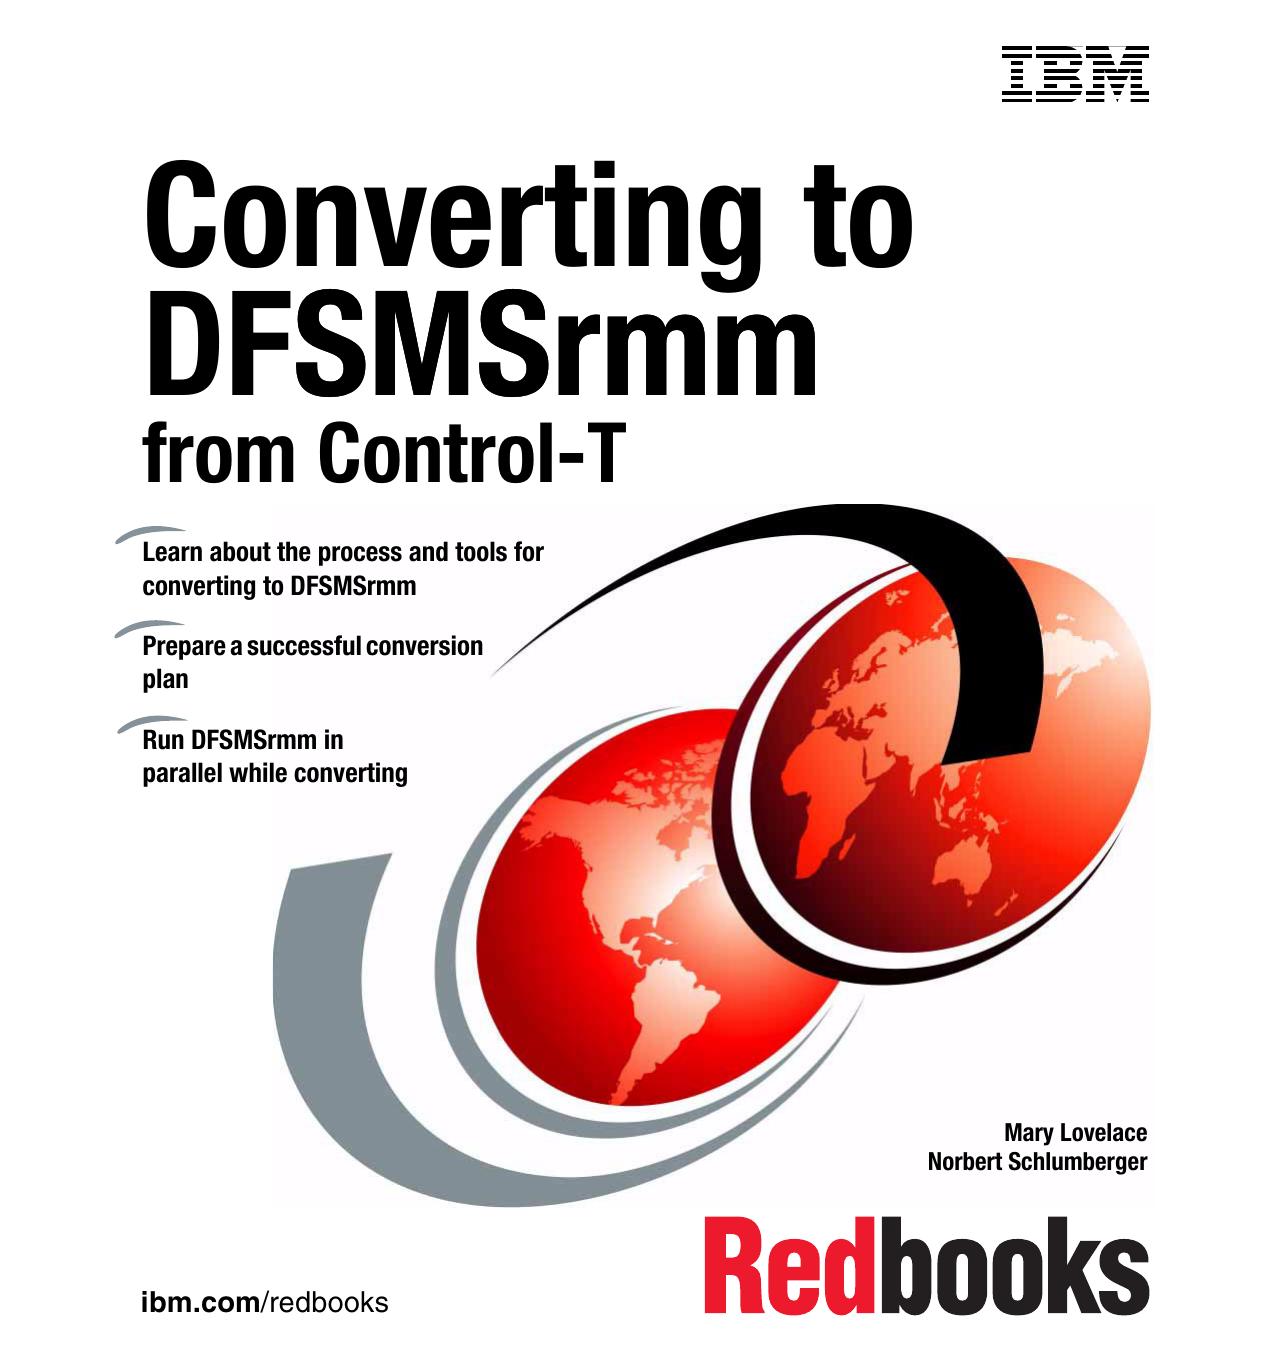 Converting to DFSMSrmm from Control-T by IBM Redbooks